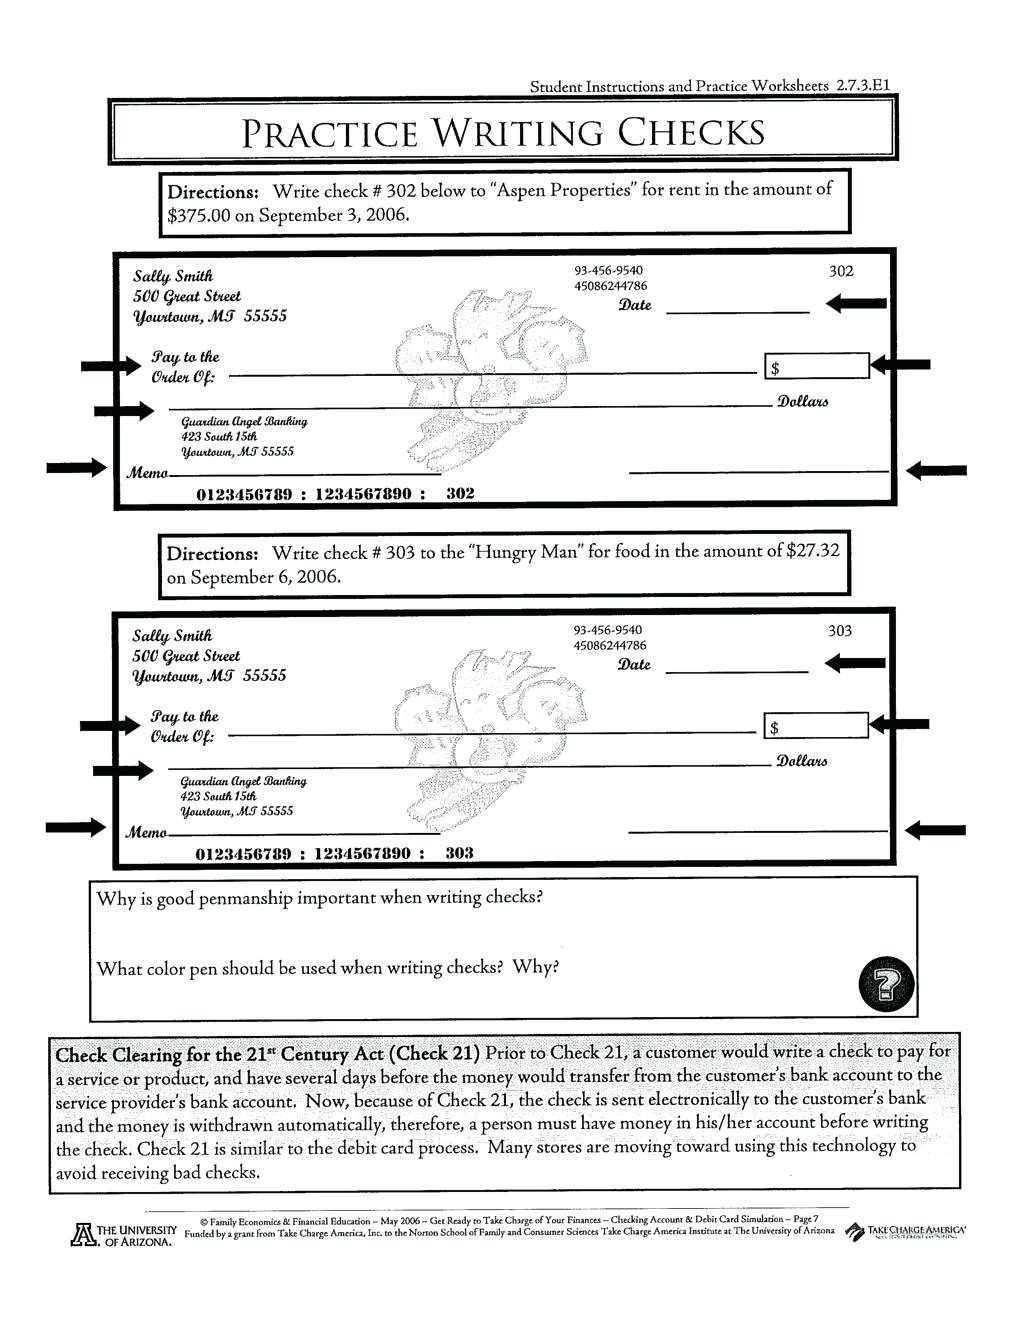 Check Writing Practice Worksheet Student Instructions And Practice